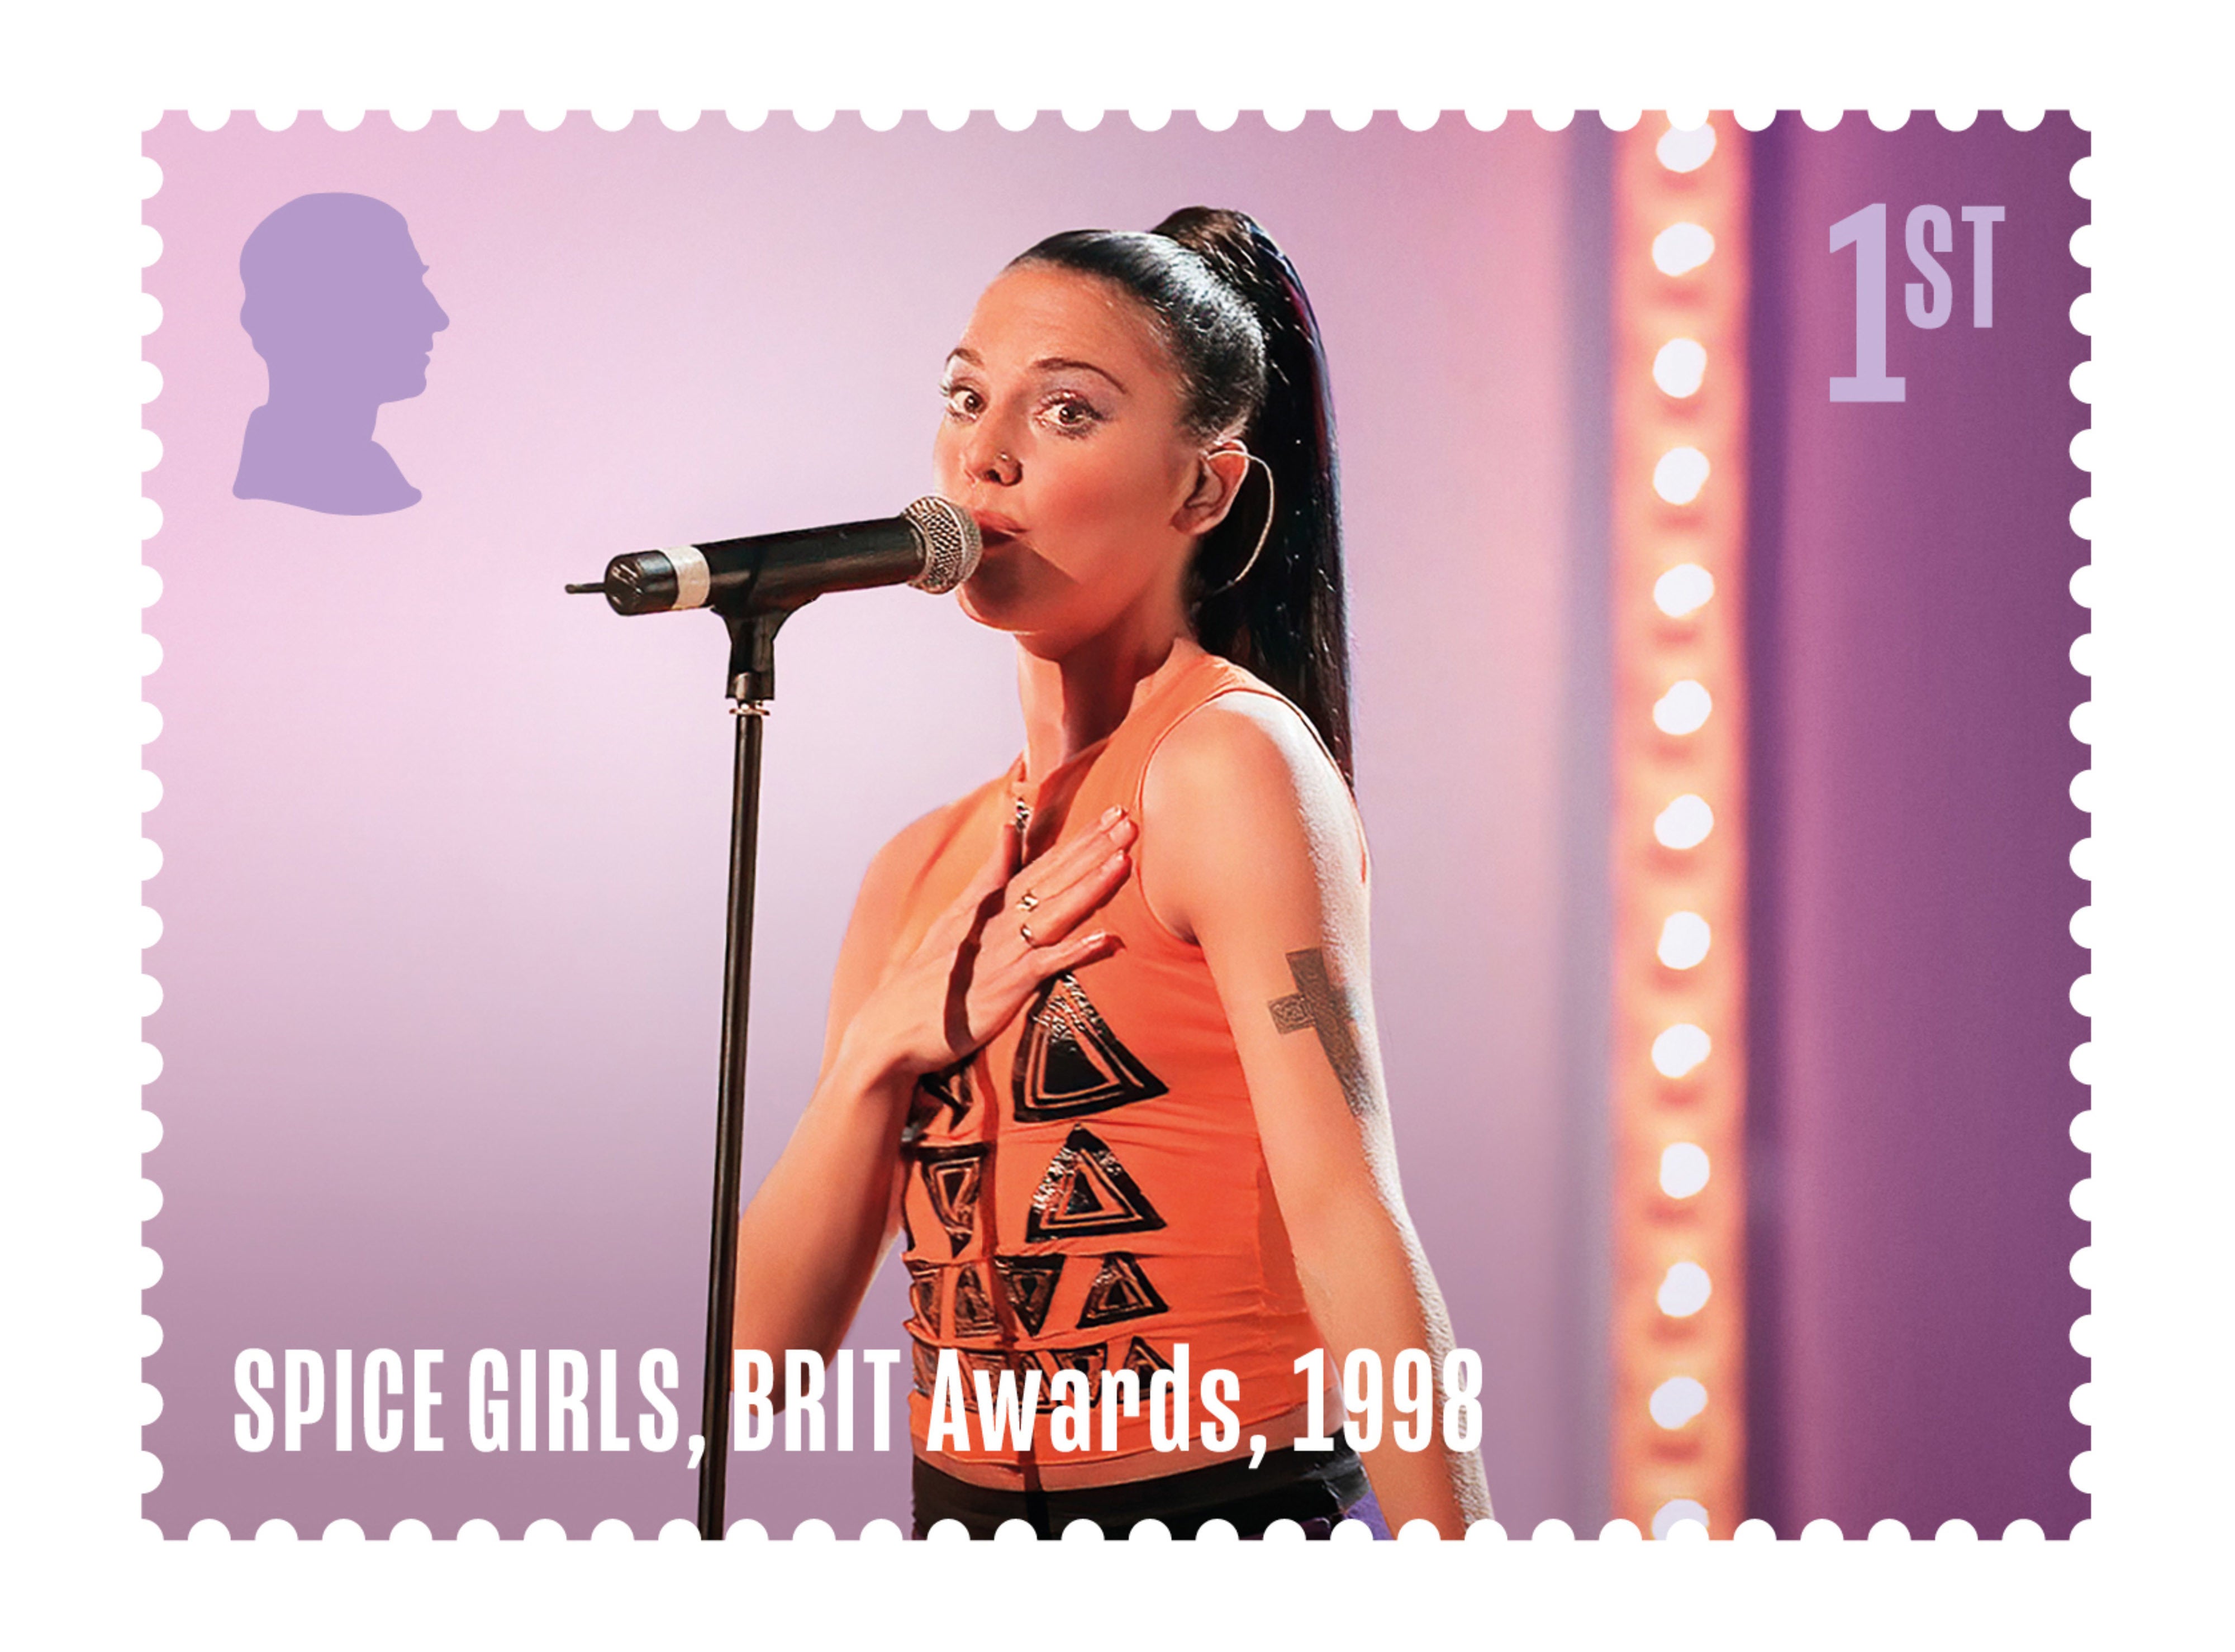 Mel C’s stamp, showing her at the Brit Awards in 1998